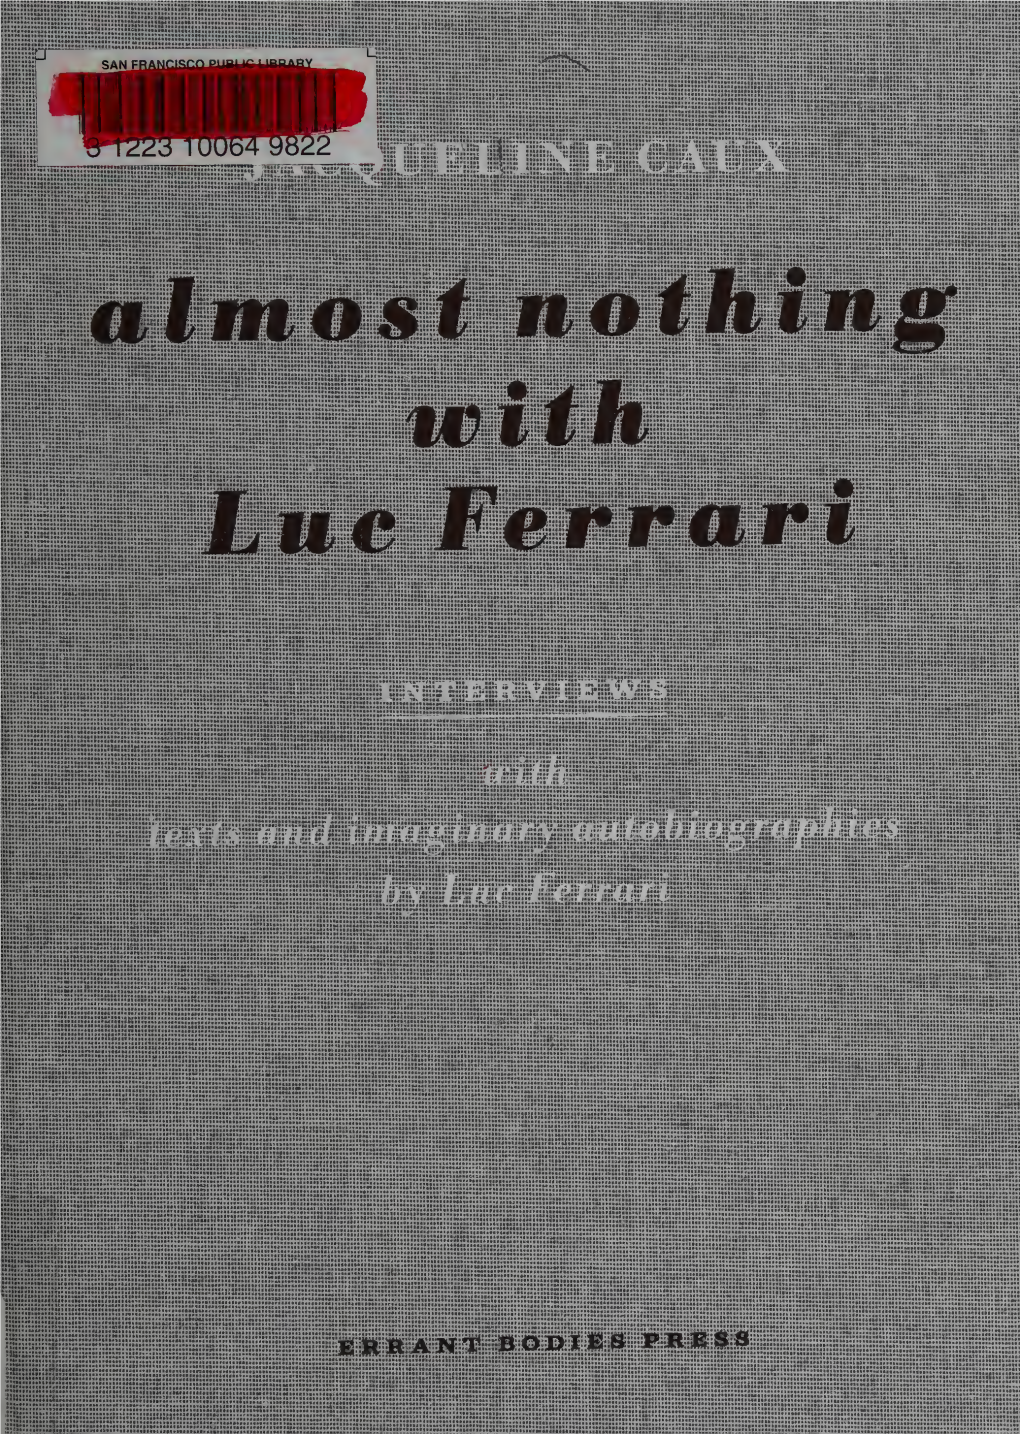 Almost Nothing with Luc Ferrari